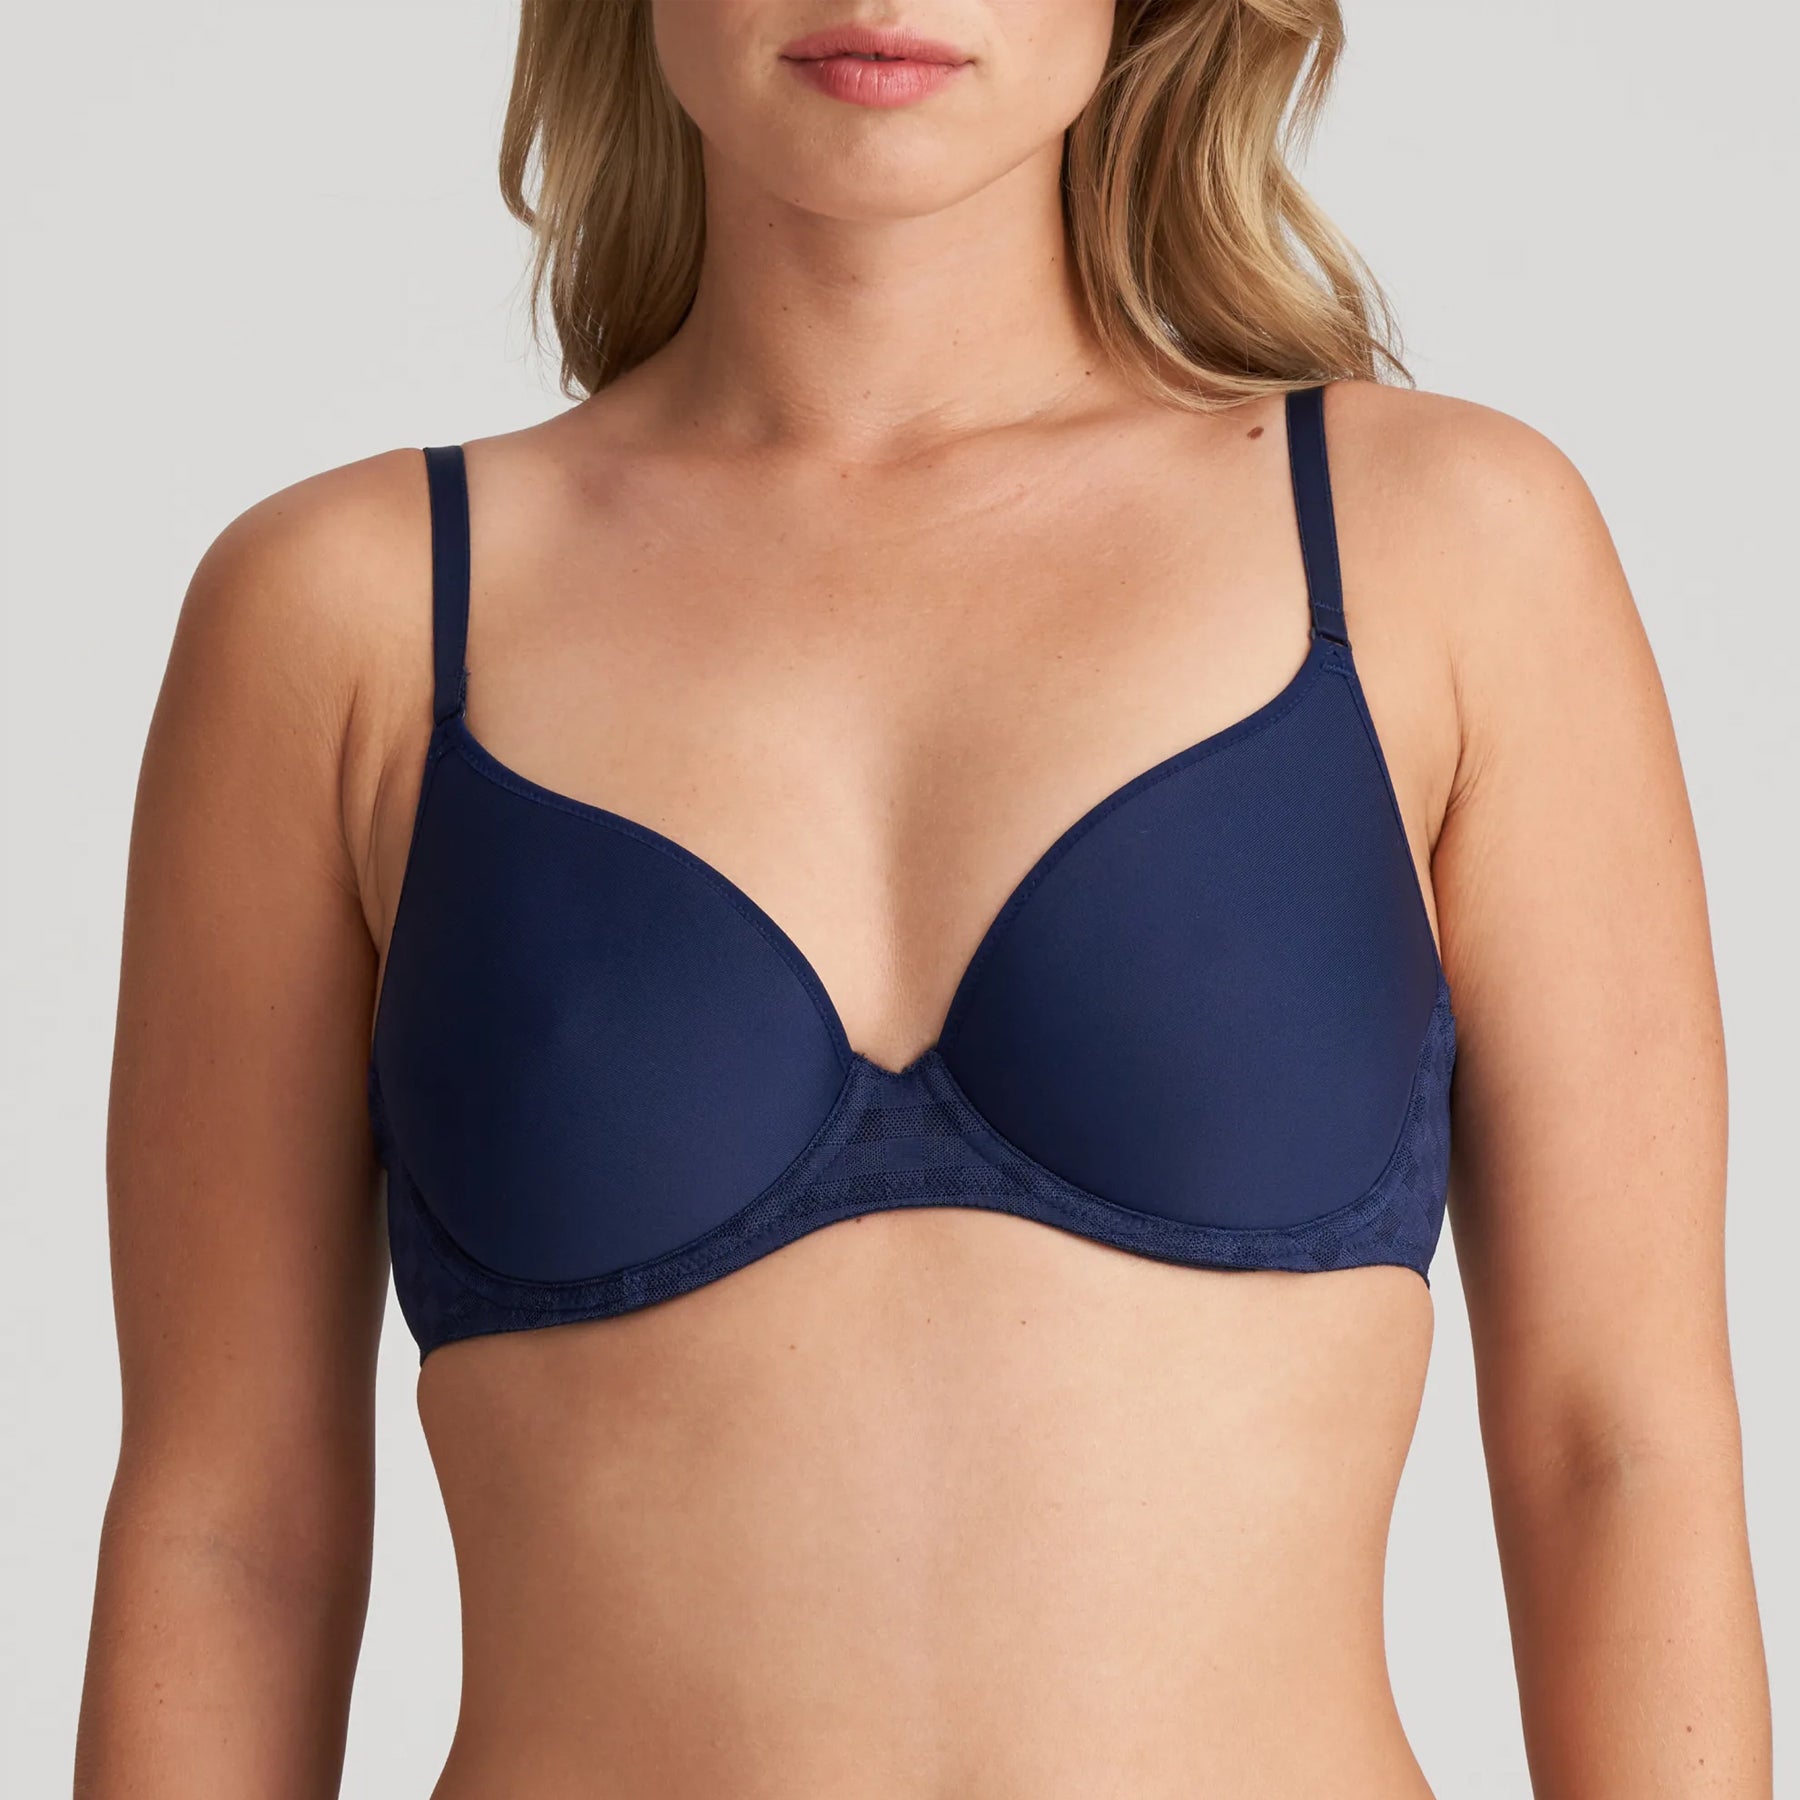 Official Store Queenral Bra — Best sellers and more on Joom